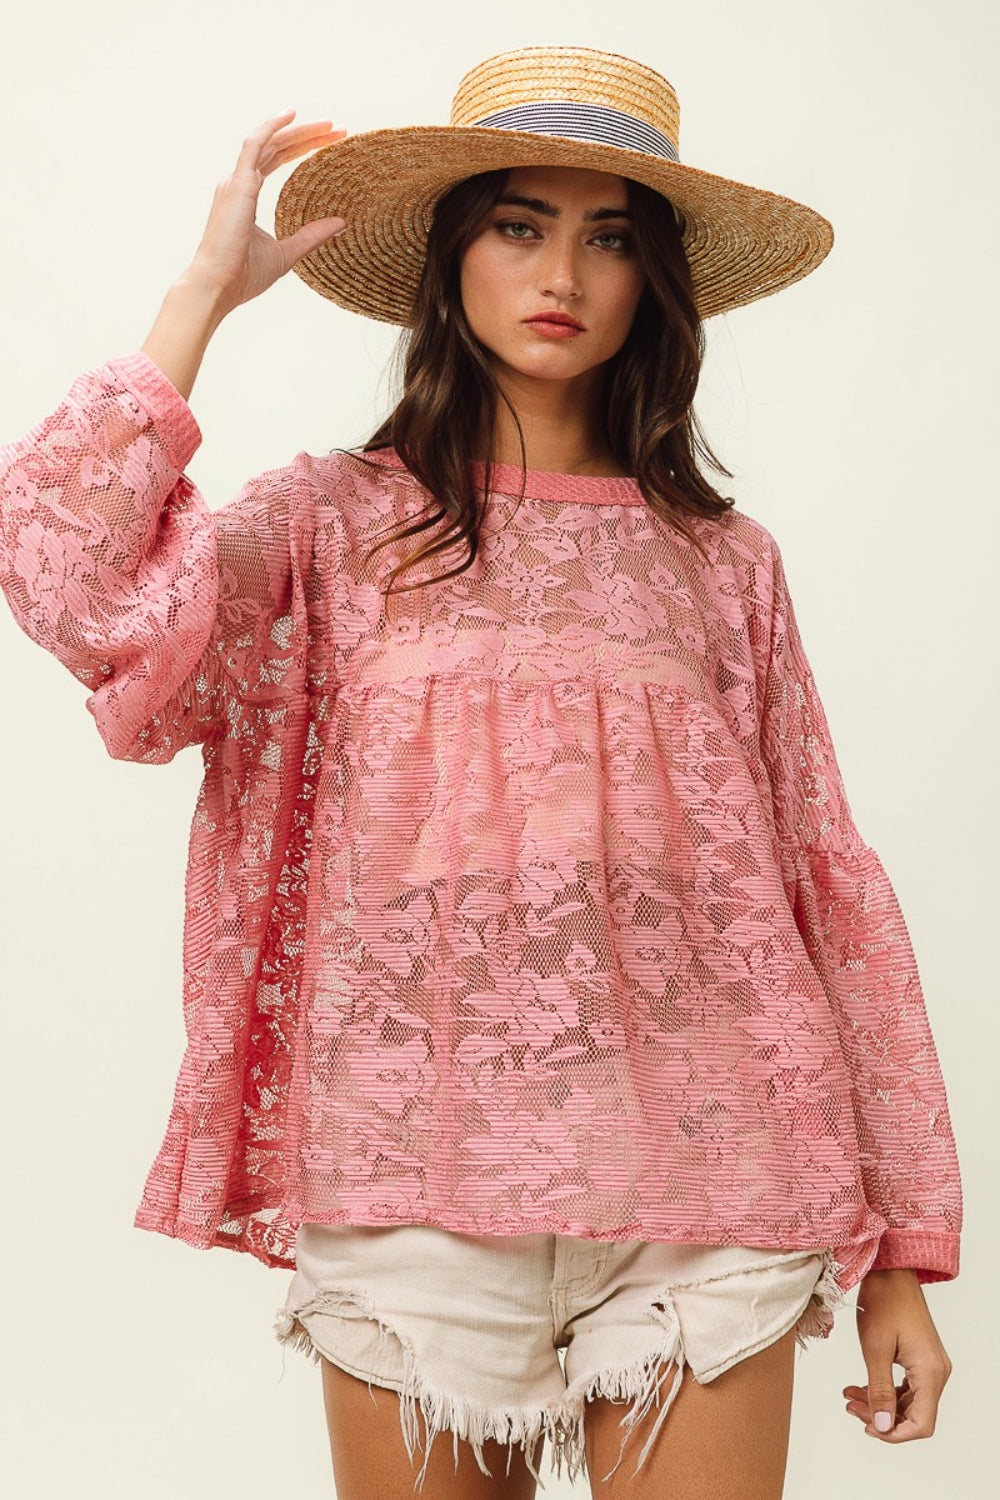 BiBi Floral Lace Long Sleeve Top-110 Long Sleeve Tops-Inspired by Justeen-Women's Clothing Boutique in Chicago, Illinois